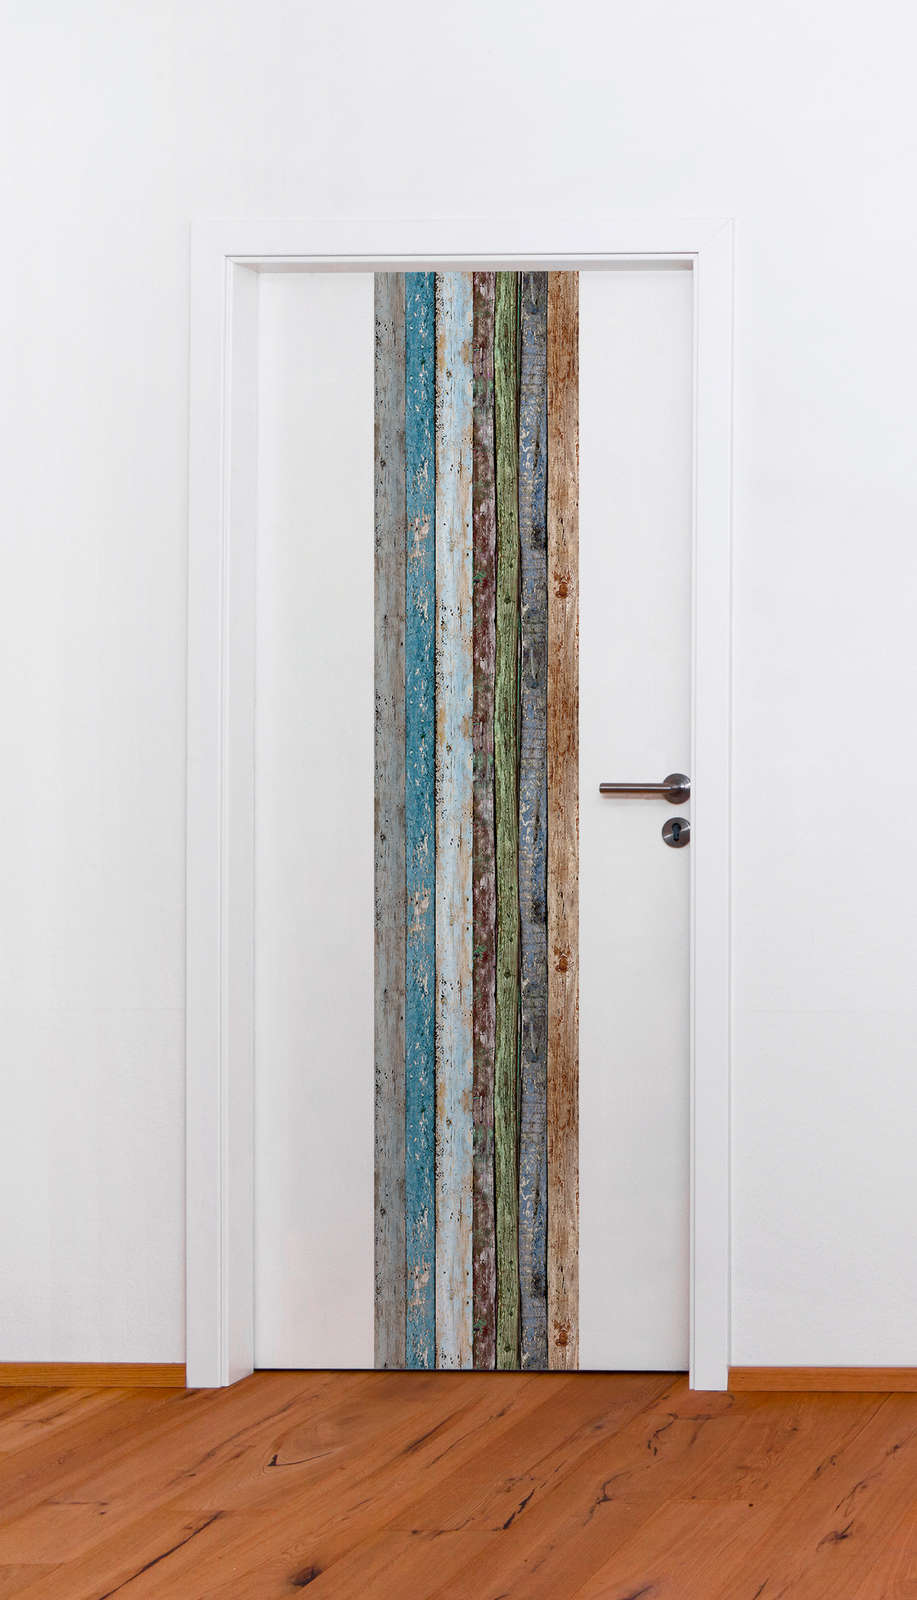             Wood look wallpaper rustic shabby chic style - Colorful
        